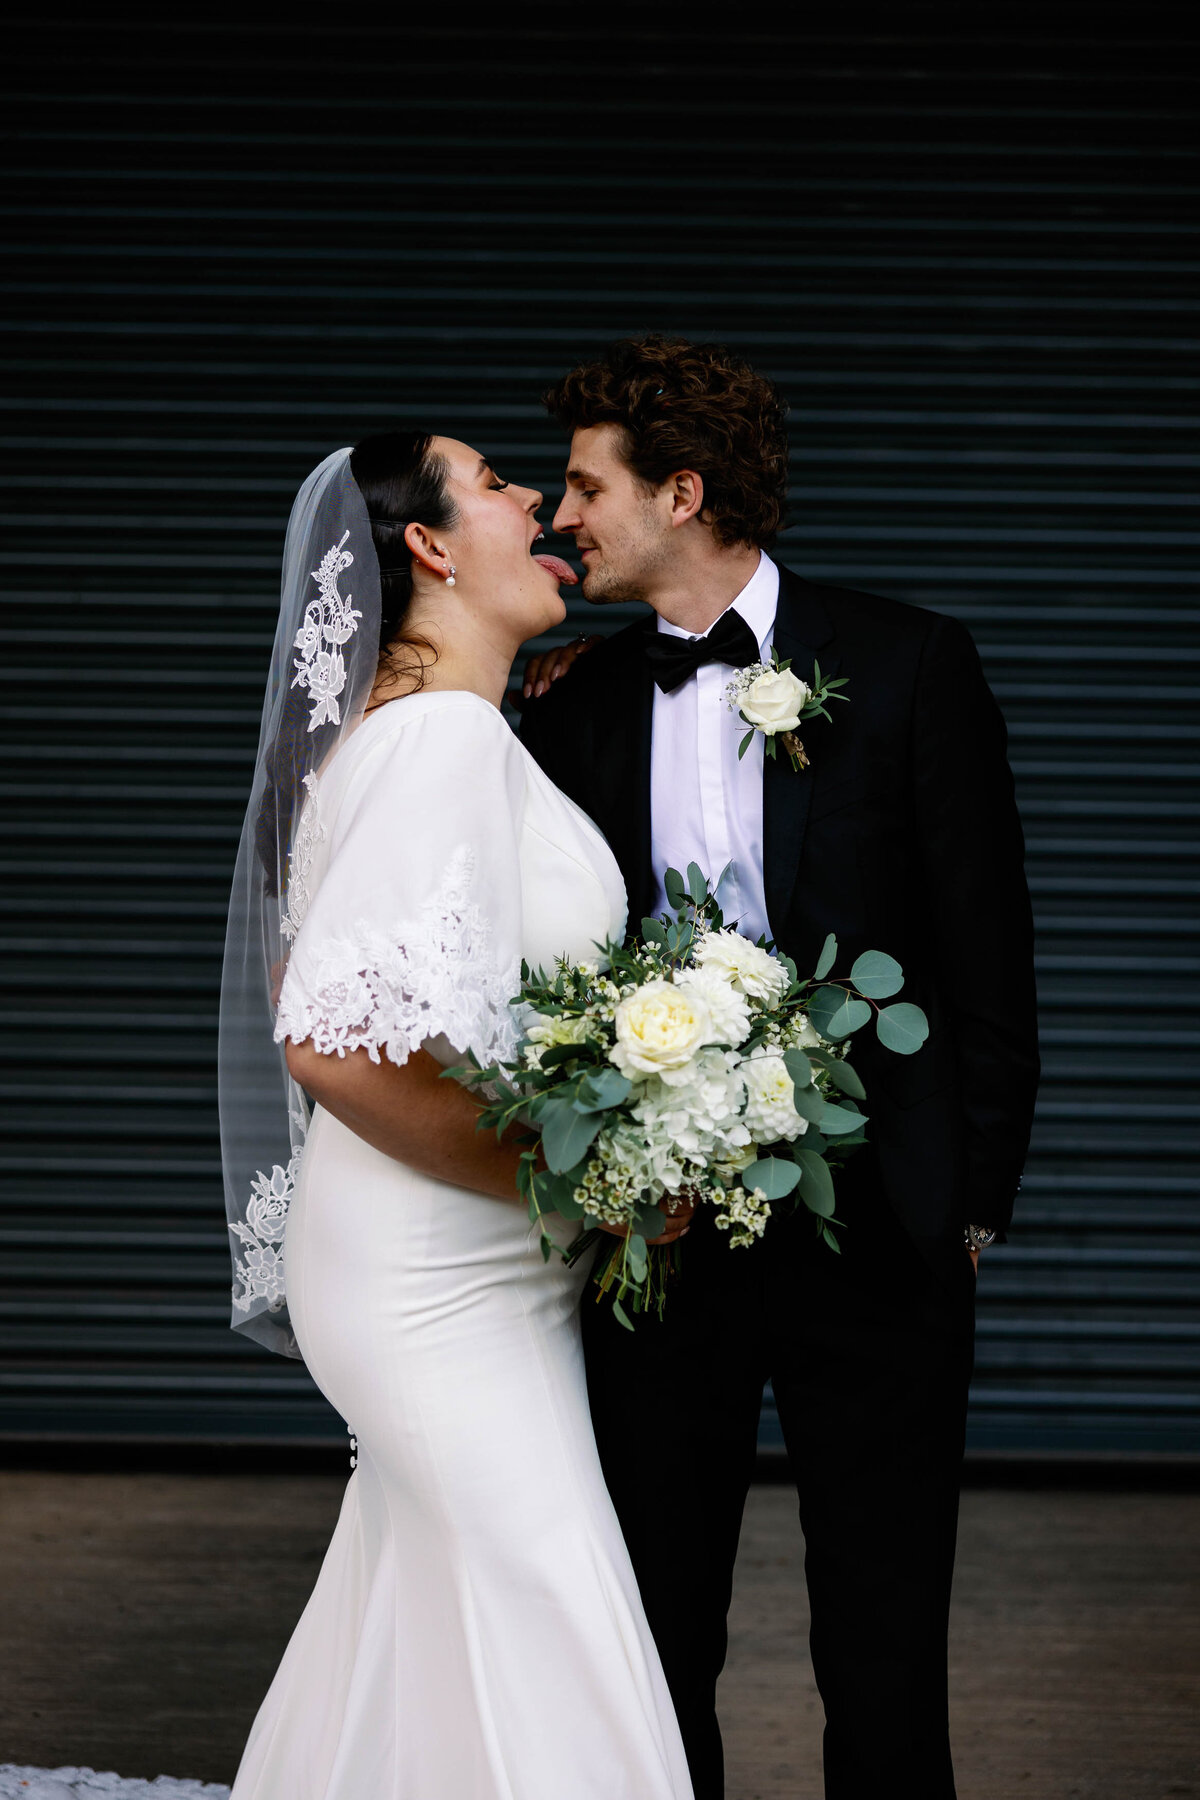 Candid photo of a bride trying to lick the grooms face during portrait session